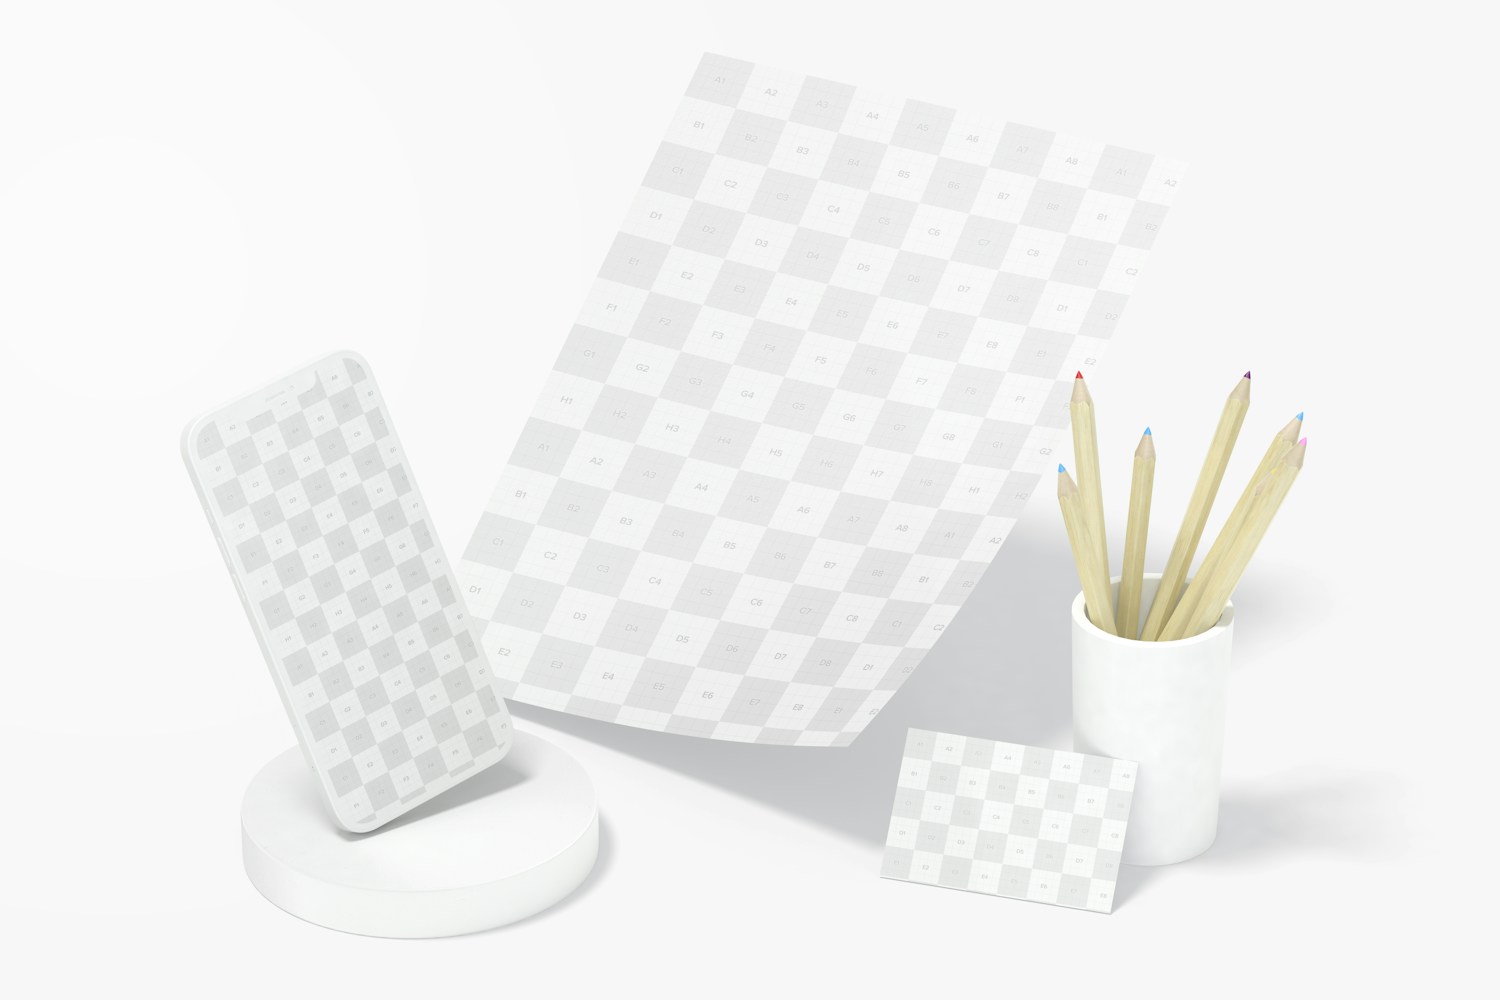 Stationery with Smartphone Mockup, Perspective